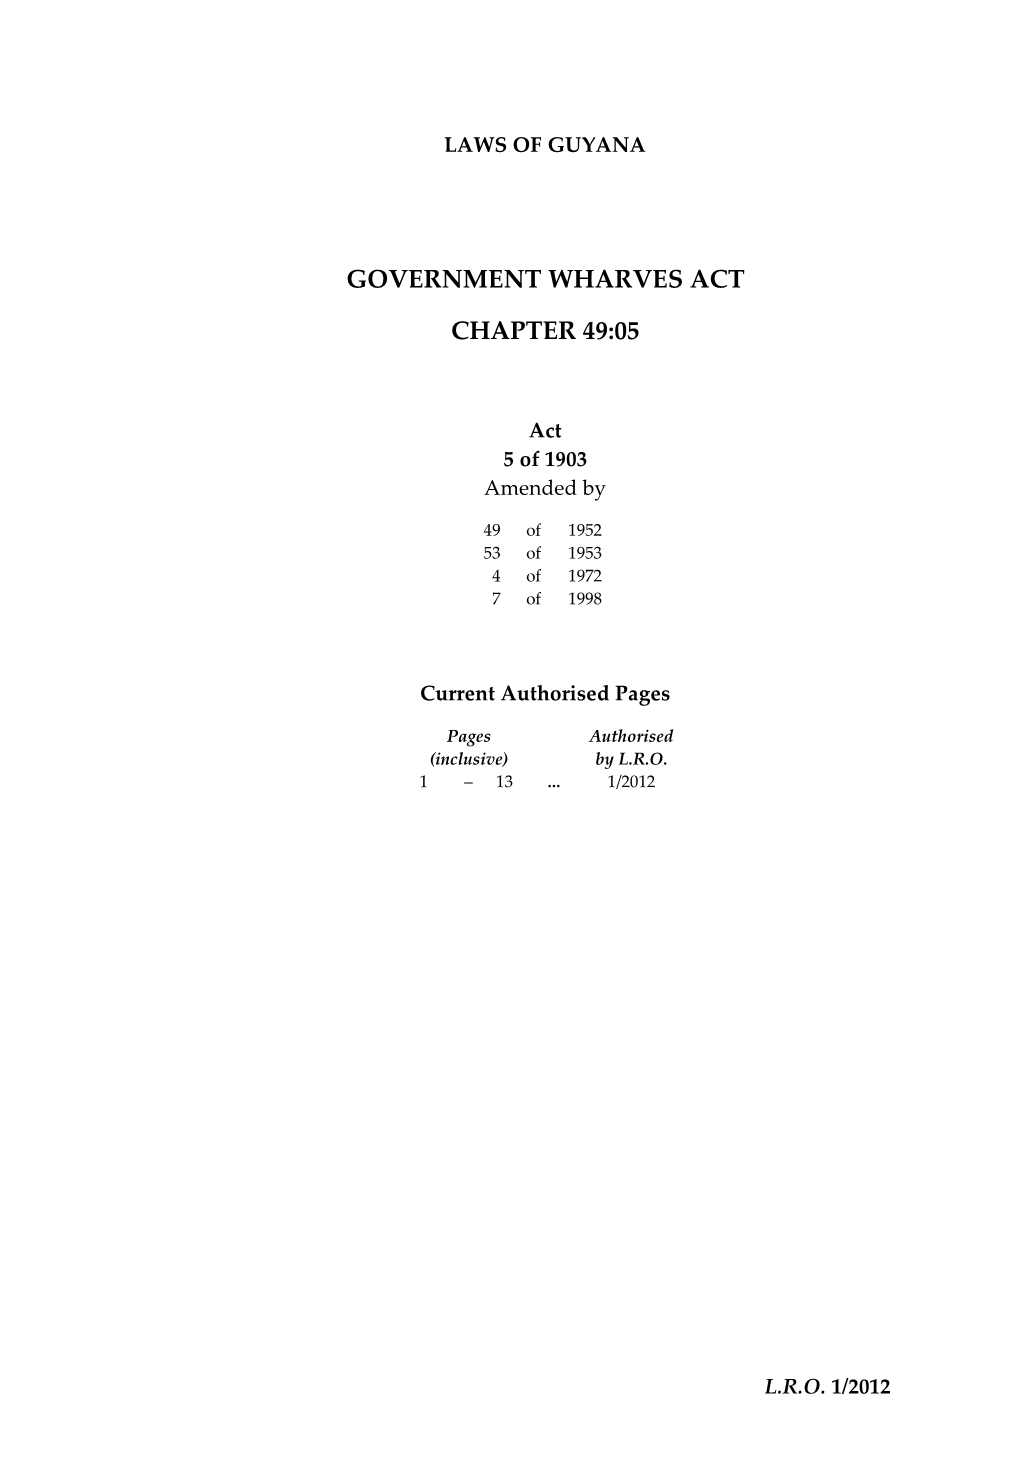 Government Wharves Act